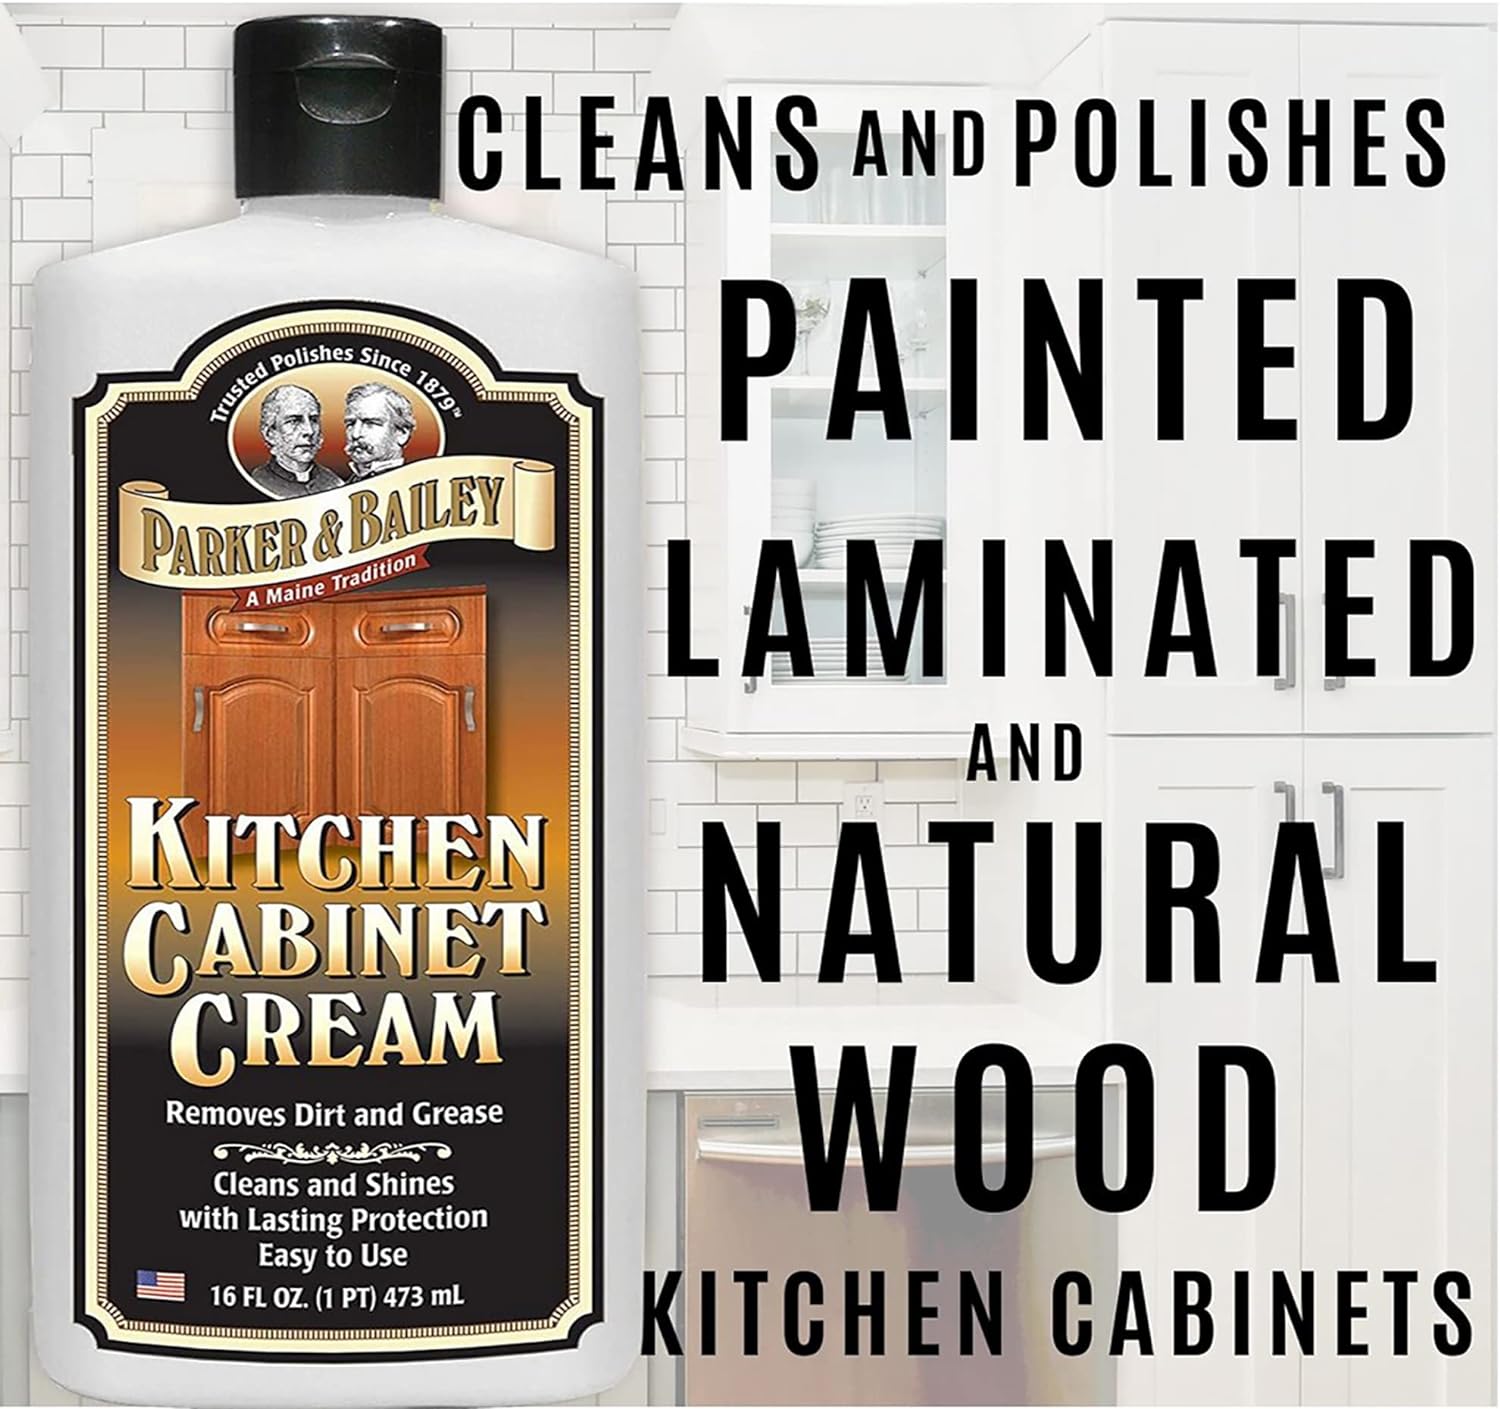 Parker and Bailey Kitchen Cabinet Cream-Wood Cleaner-Grease Remover 16 oz (2) : Health & Household